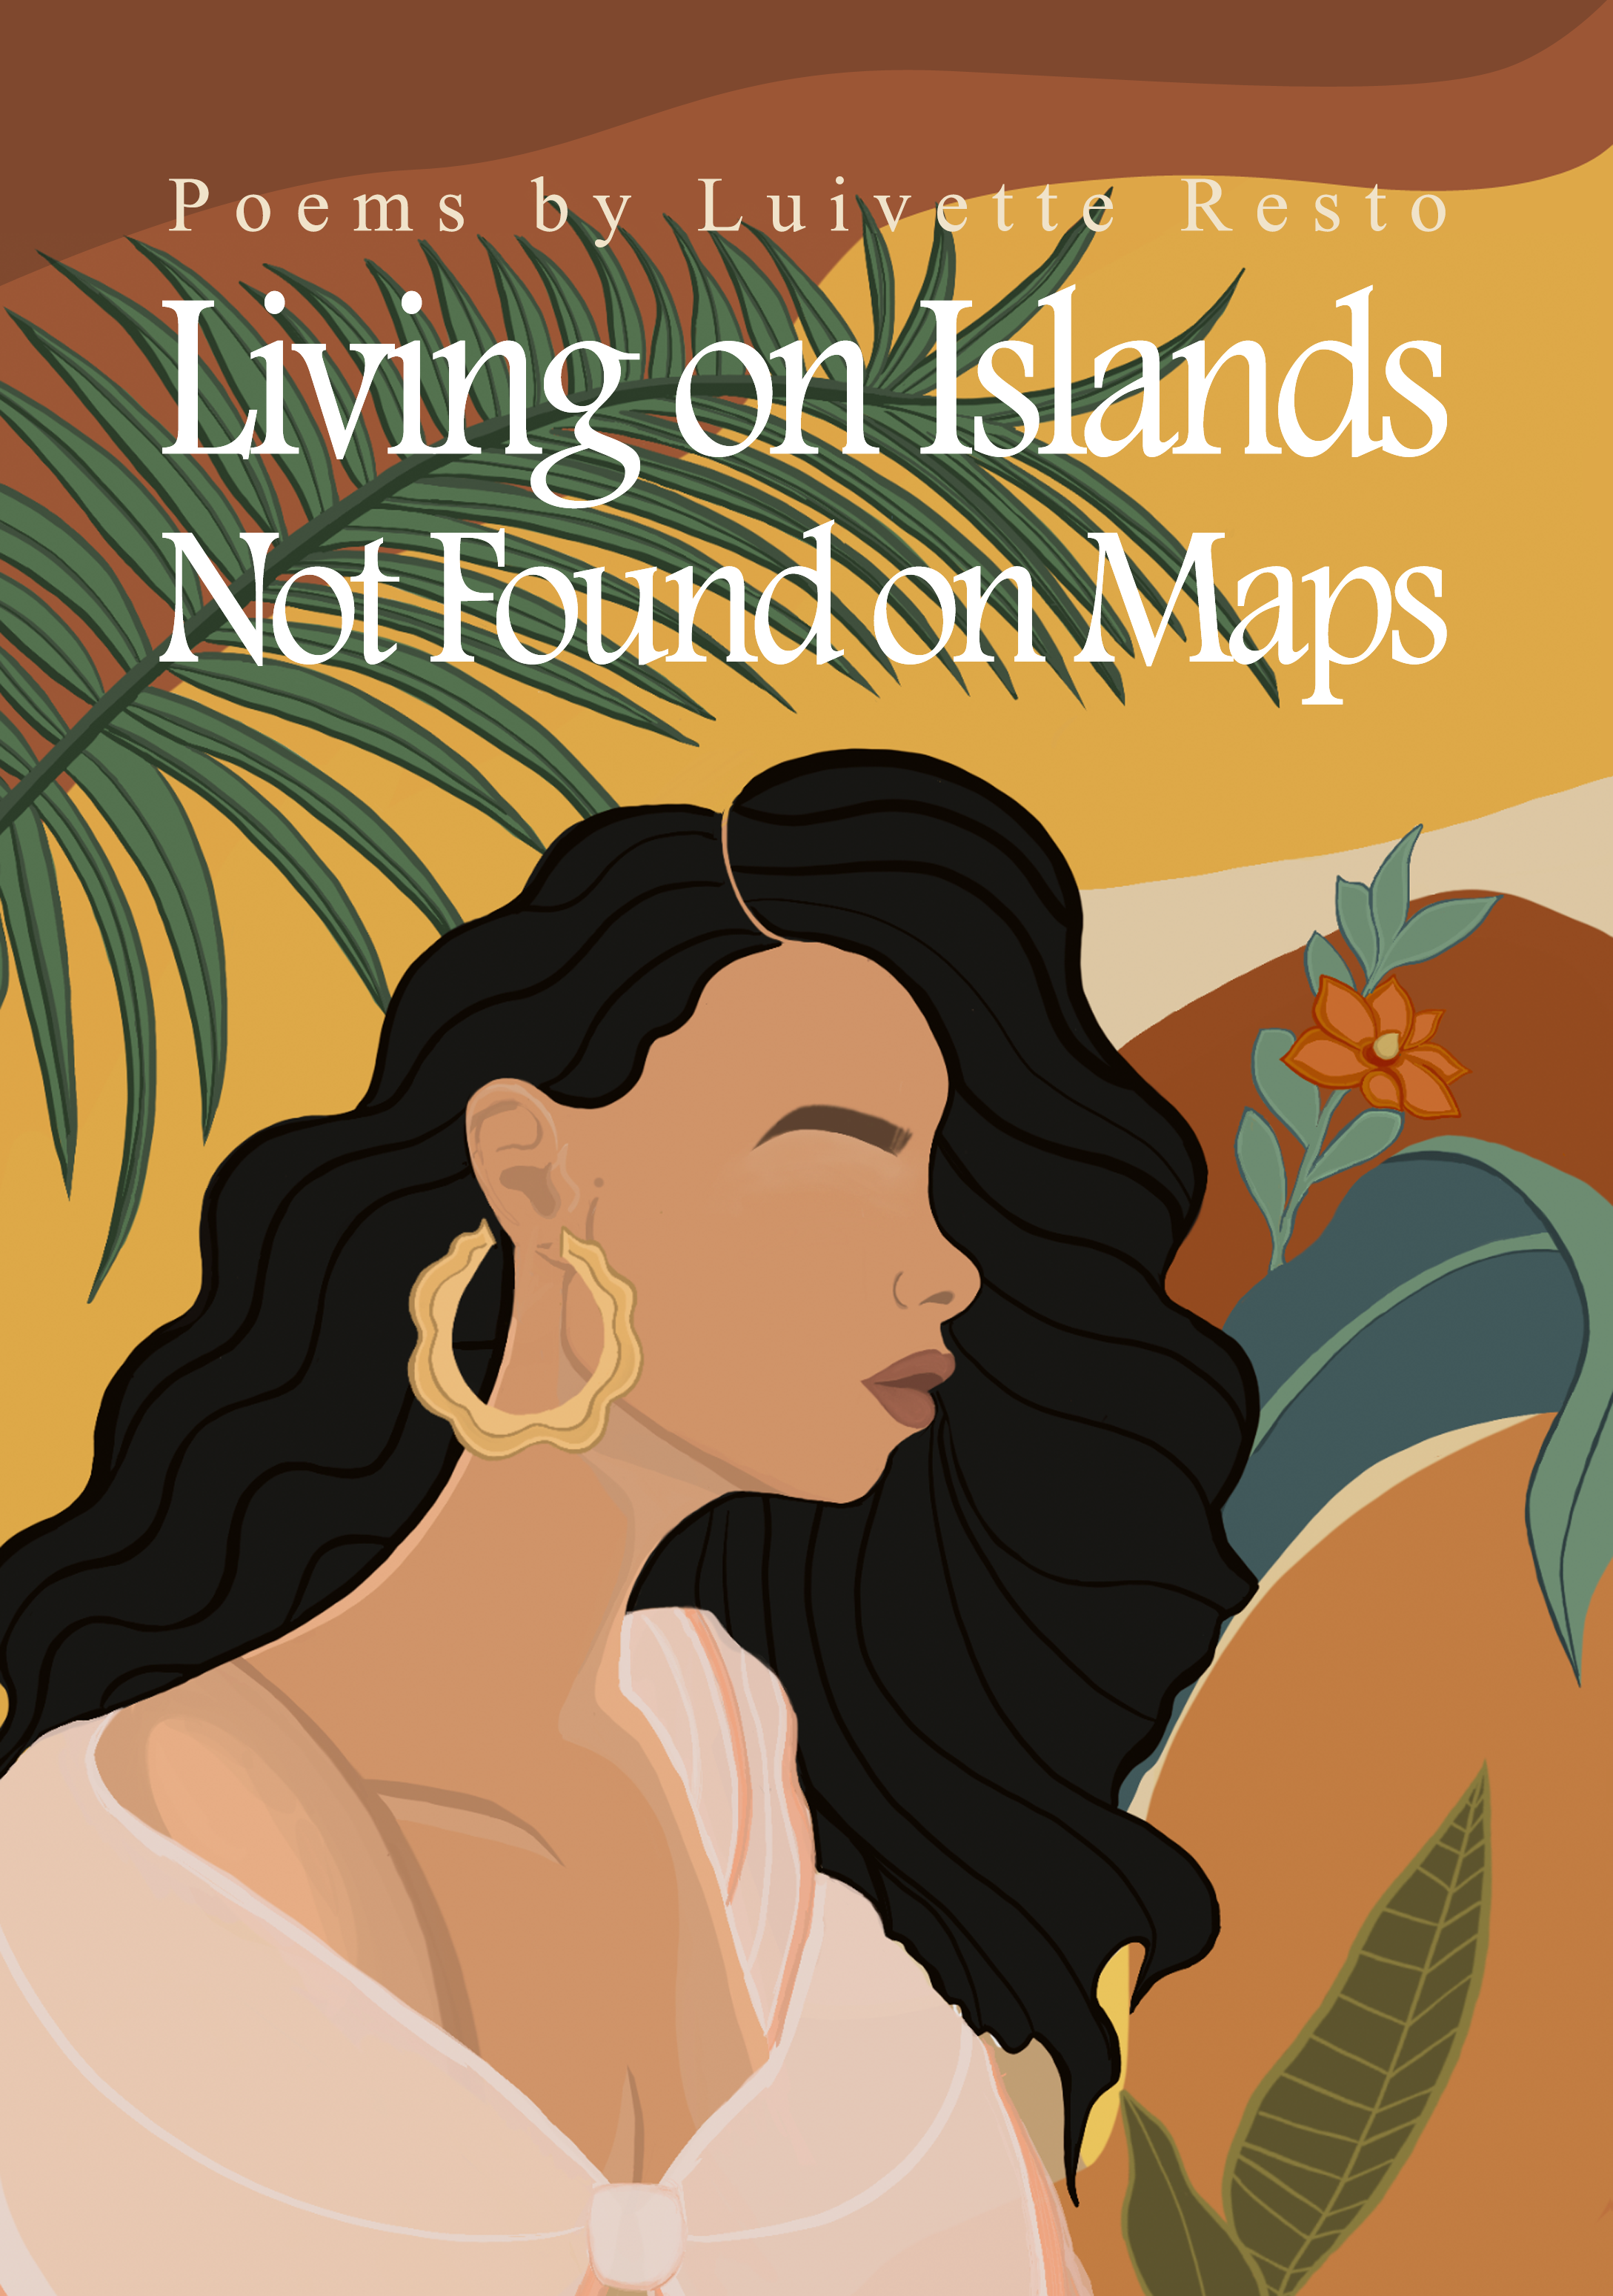 Living on Islands Not Found on Maps